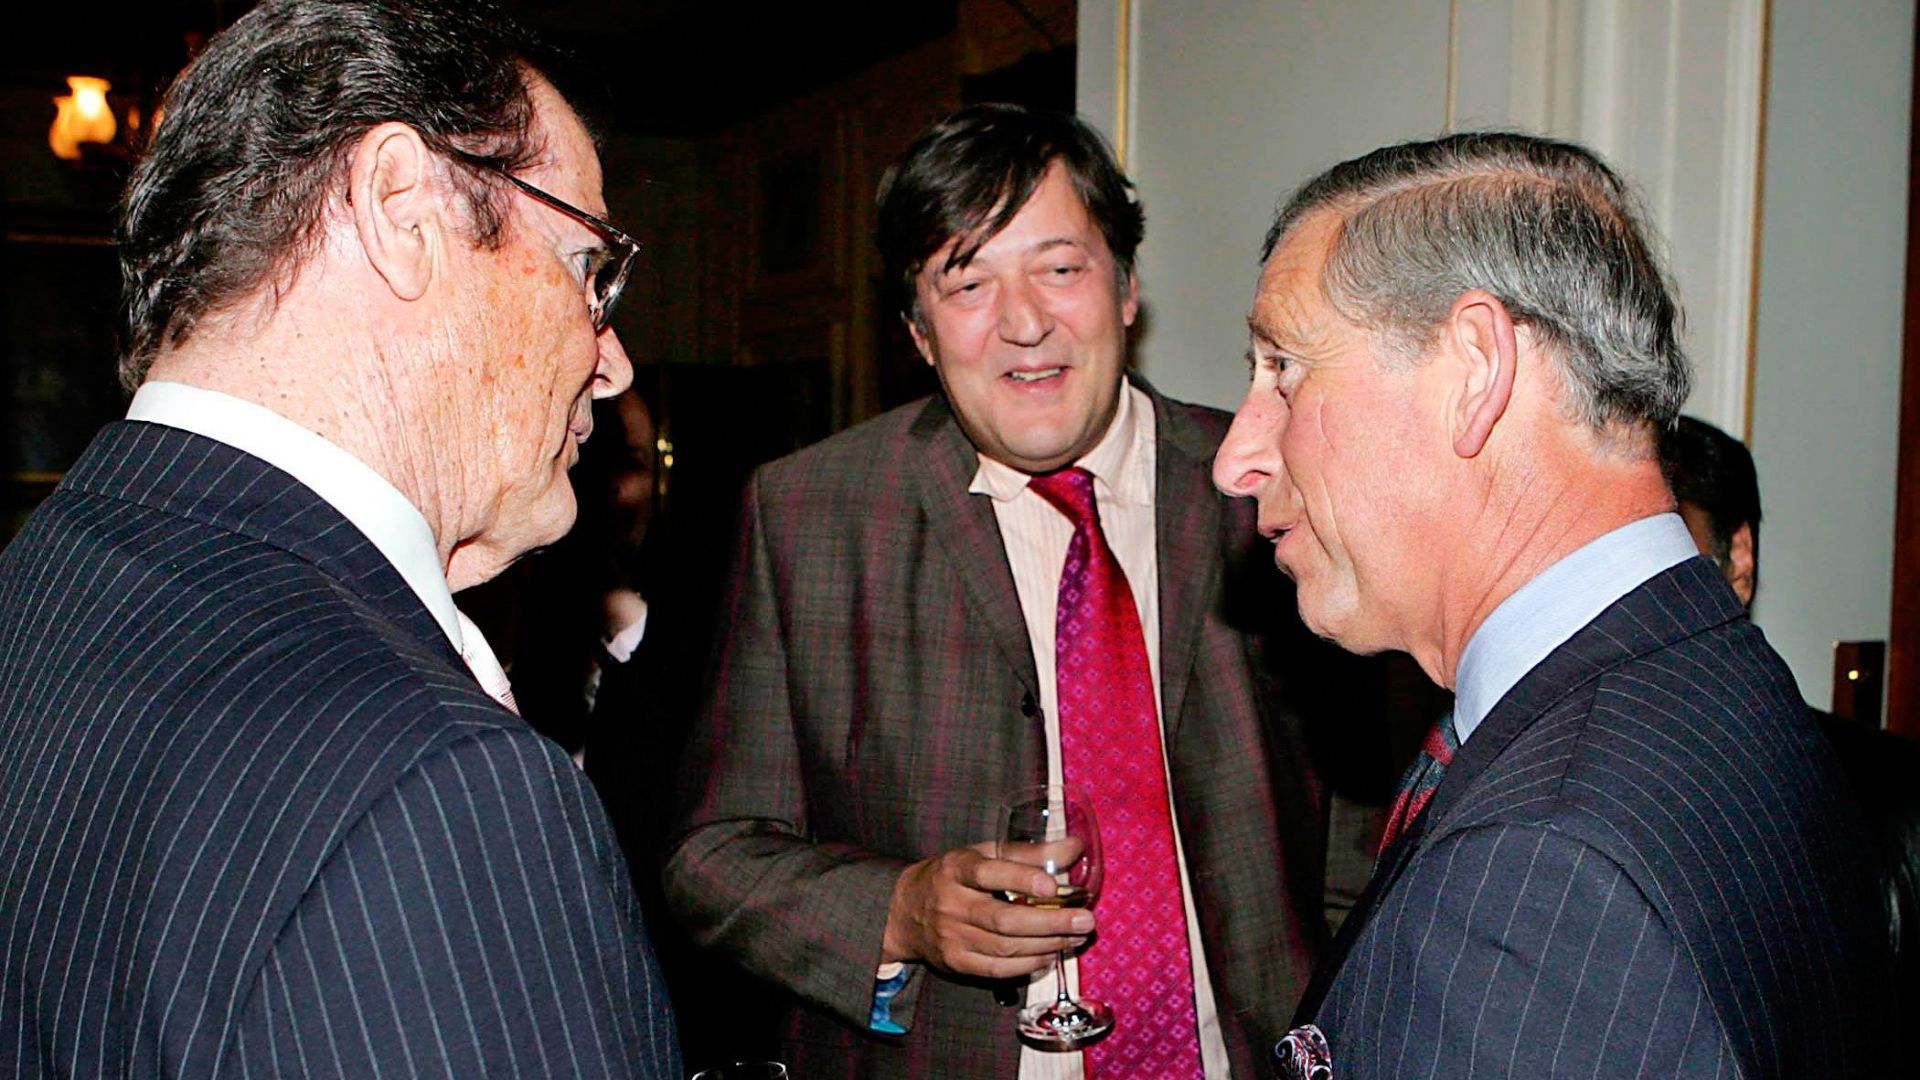 <p>                     At the Prince’s Trust Comedy Gala at the Lyceum Theatre in 1998, the then-Prince Charles took part in a beloved comedy sketch featuring Roger Moore and Stephen Fry. The sketch saw a series of celebrity lookalikes bringing food to Fry and Moore, however, the real Charles eventually came out dressed as a waiter and asked if the food was to their satisfaction. Moore finished the sketch by saying, “I know who he’s supposed to be, but he needs to work on the voice a little.”                   </p>